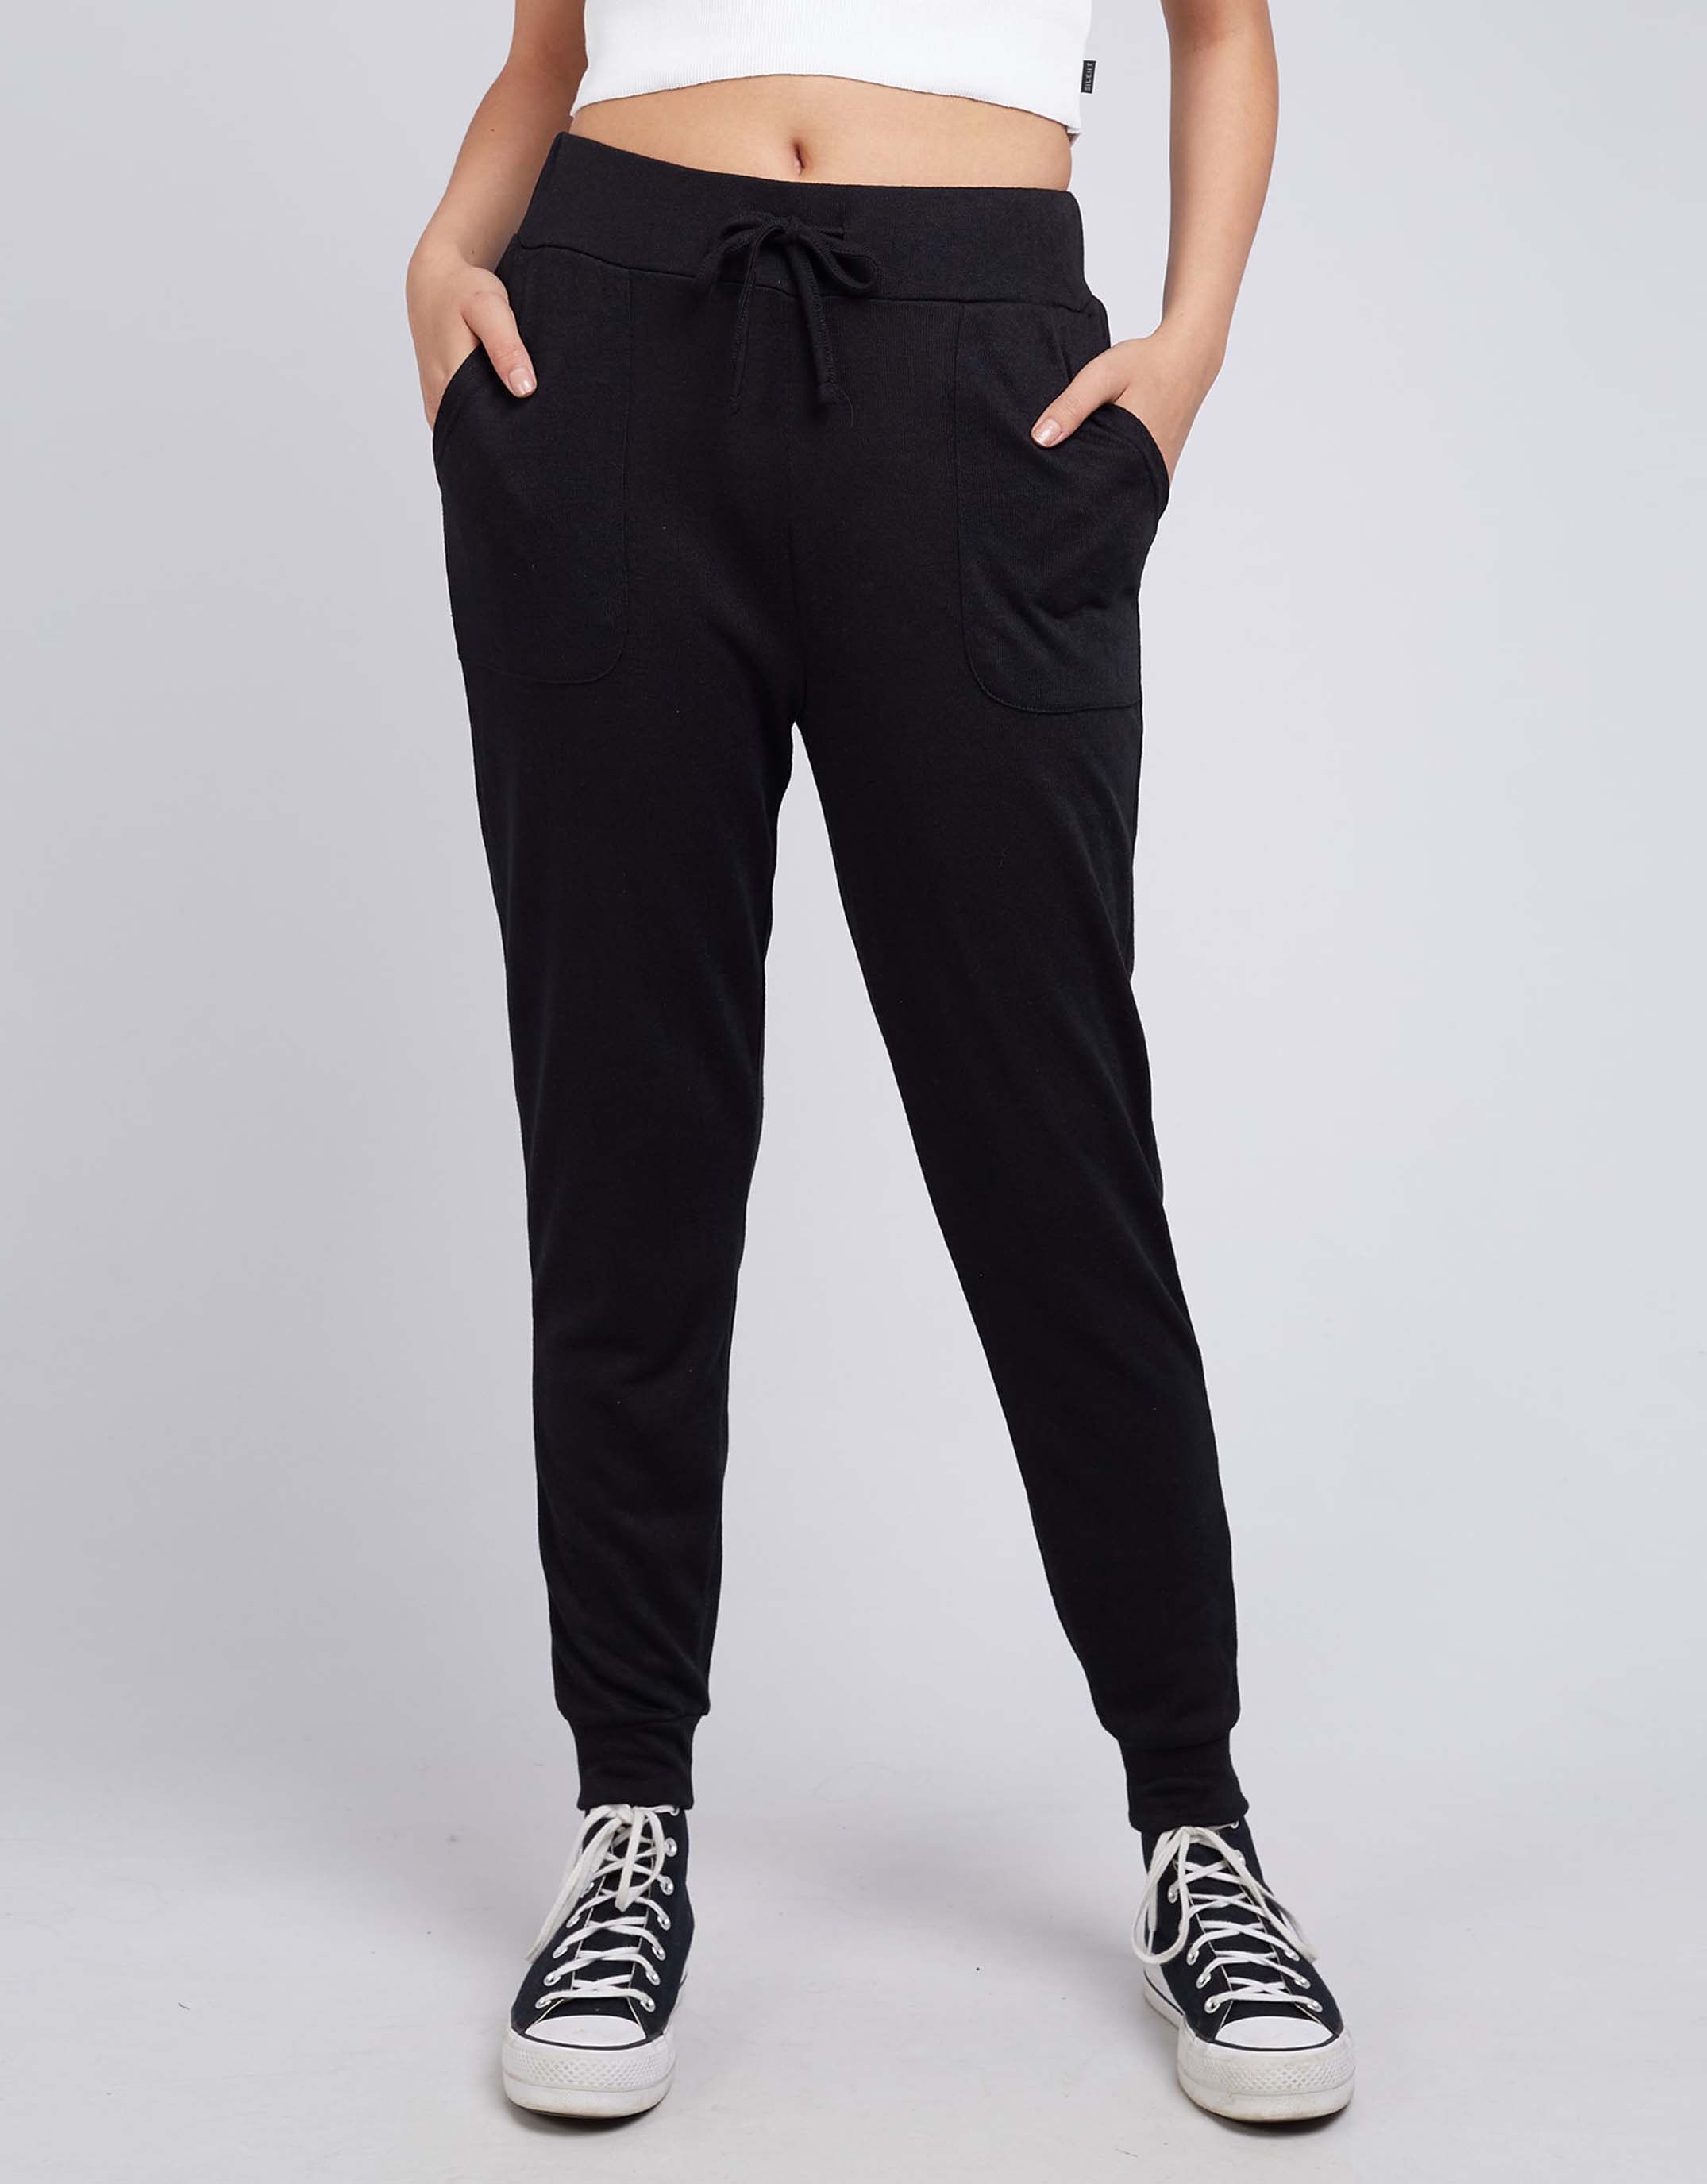 silent-theory-luxe-jogger-black-womens-clothing